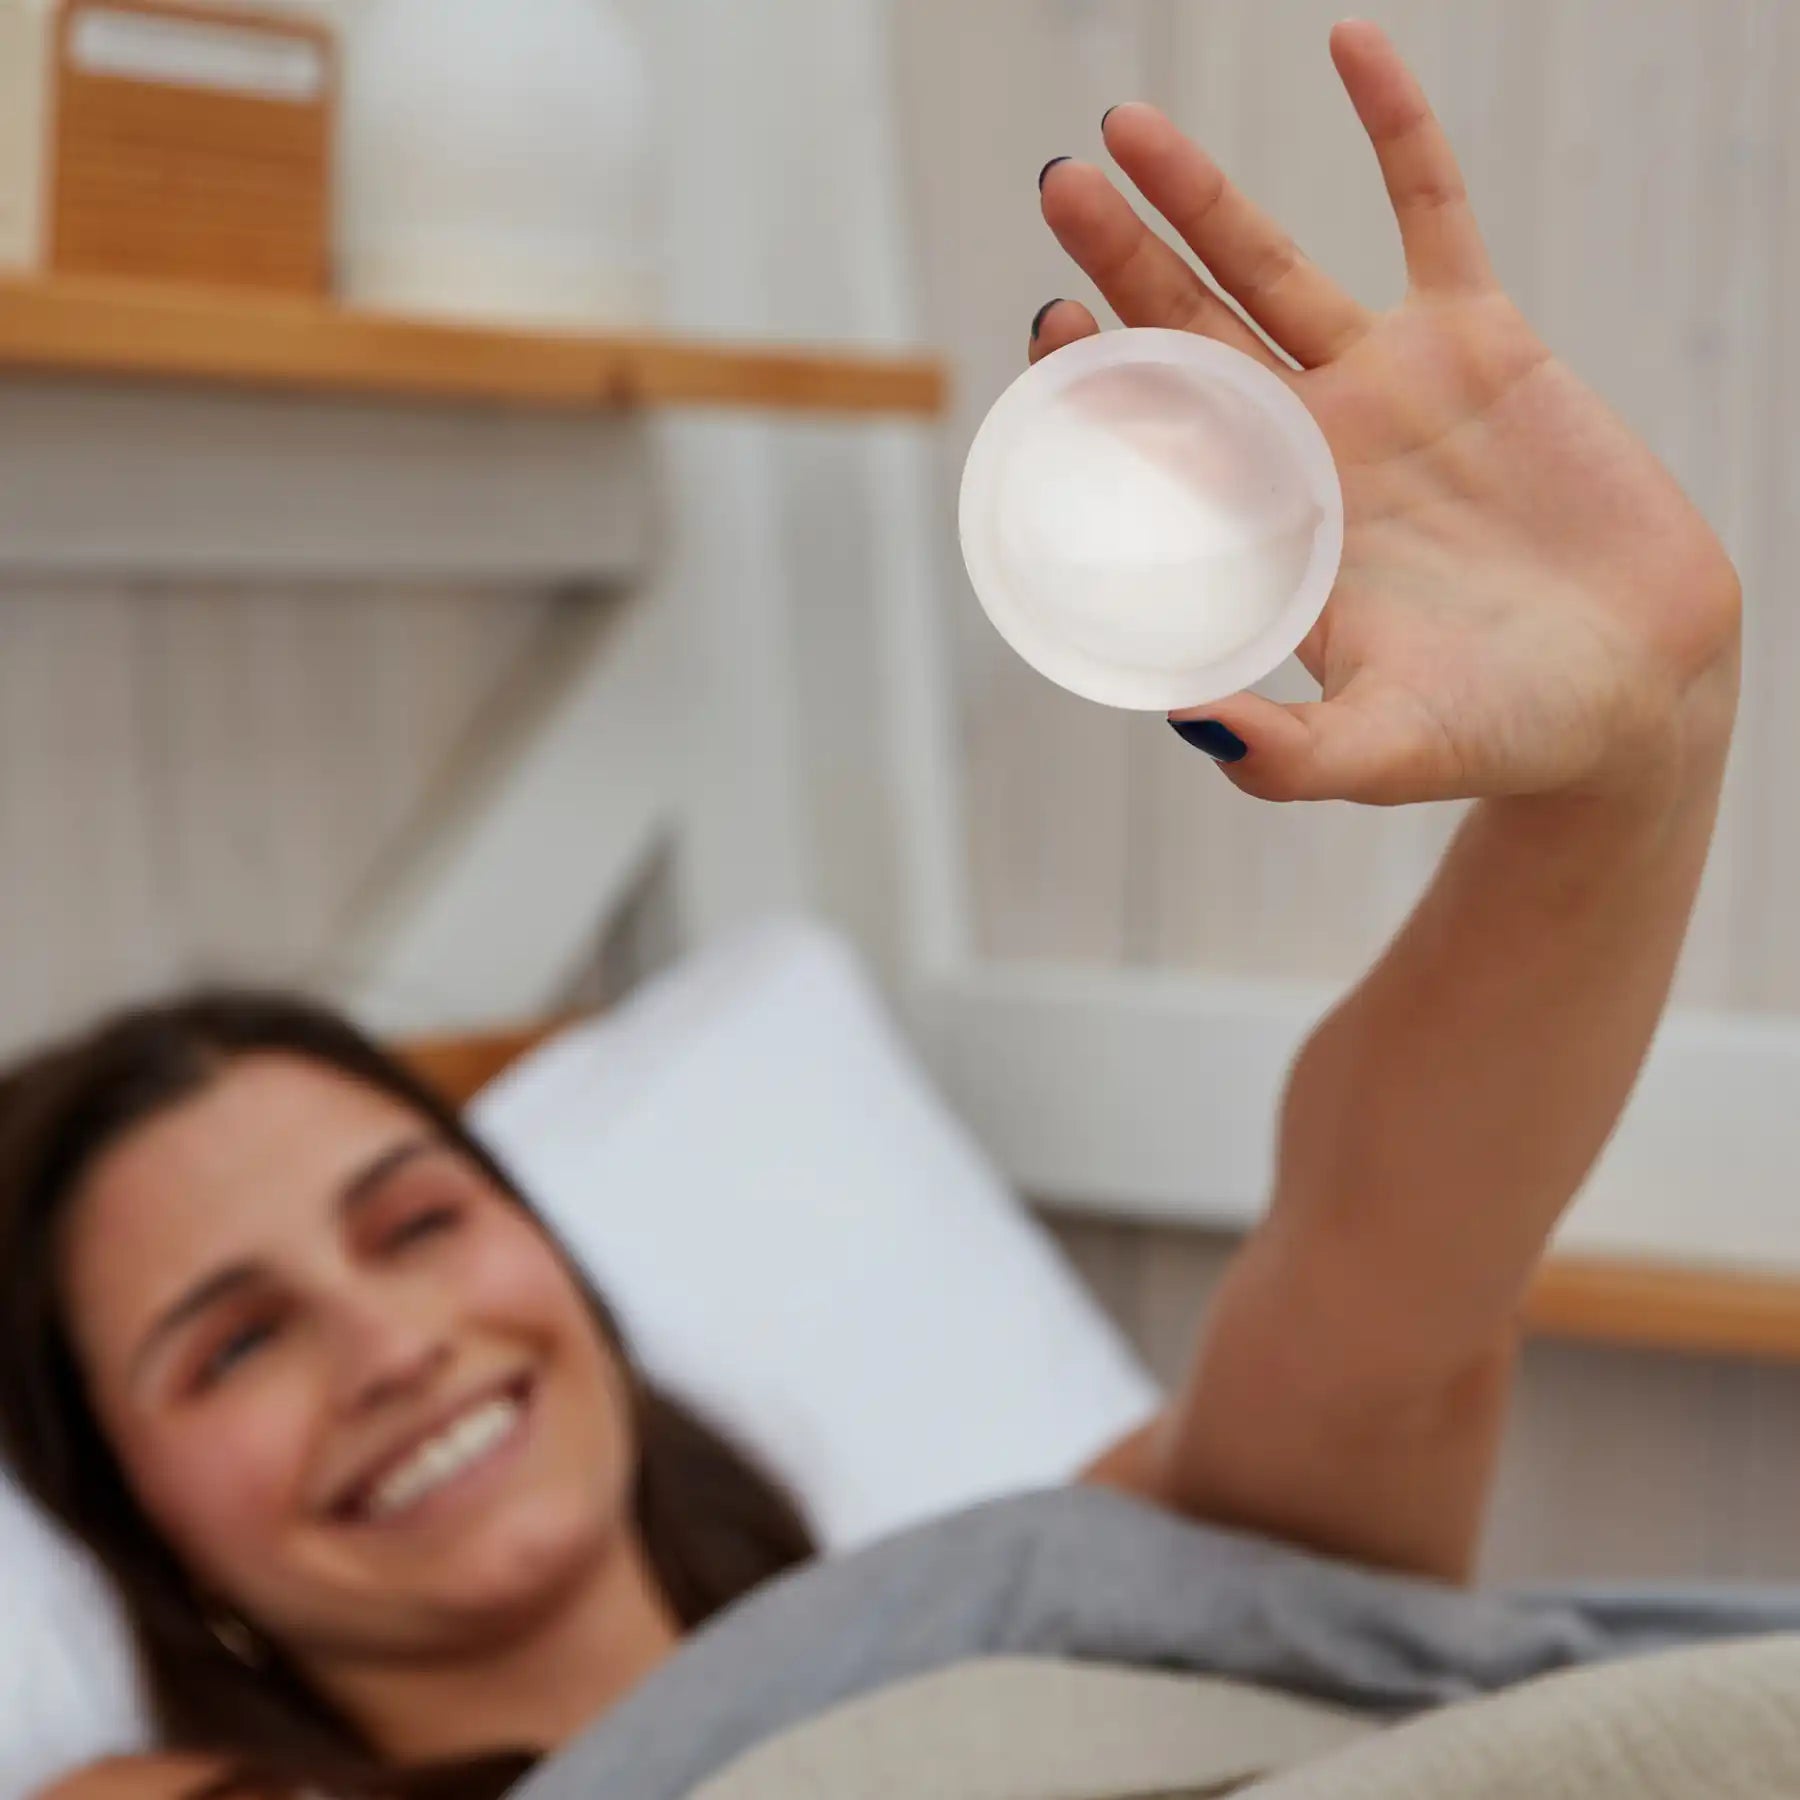 A person happy and smiling holding a Flex Reusable Menstrual Disc up in front of her face